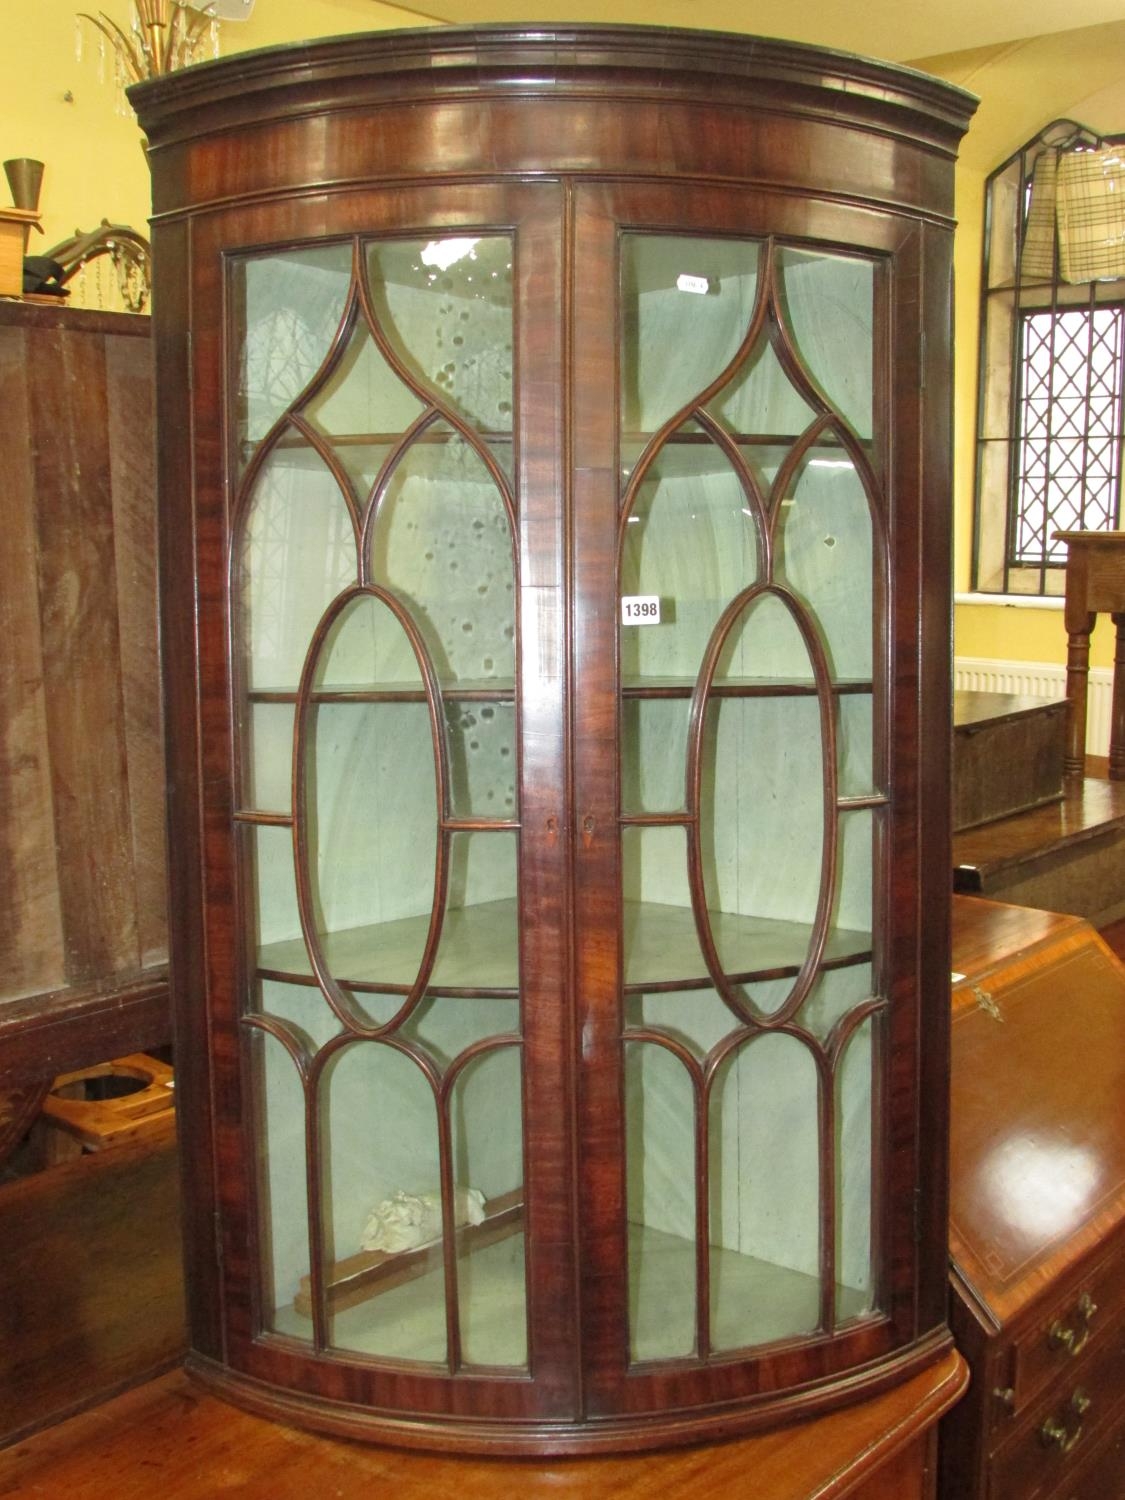 A Regency mahogany bow fronted hanging corner cupboard with astragal glazed panelled doors, original